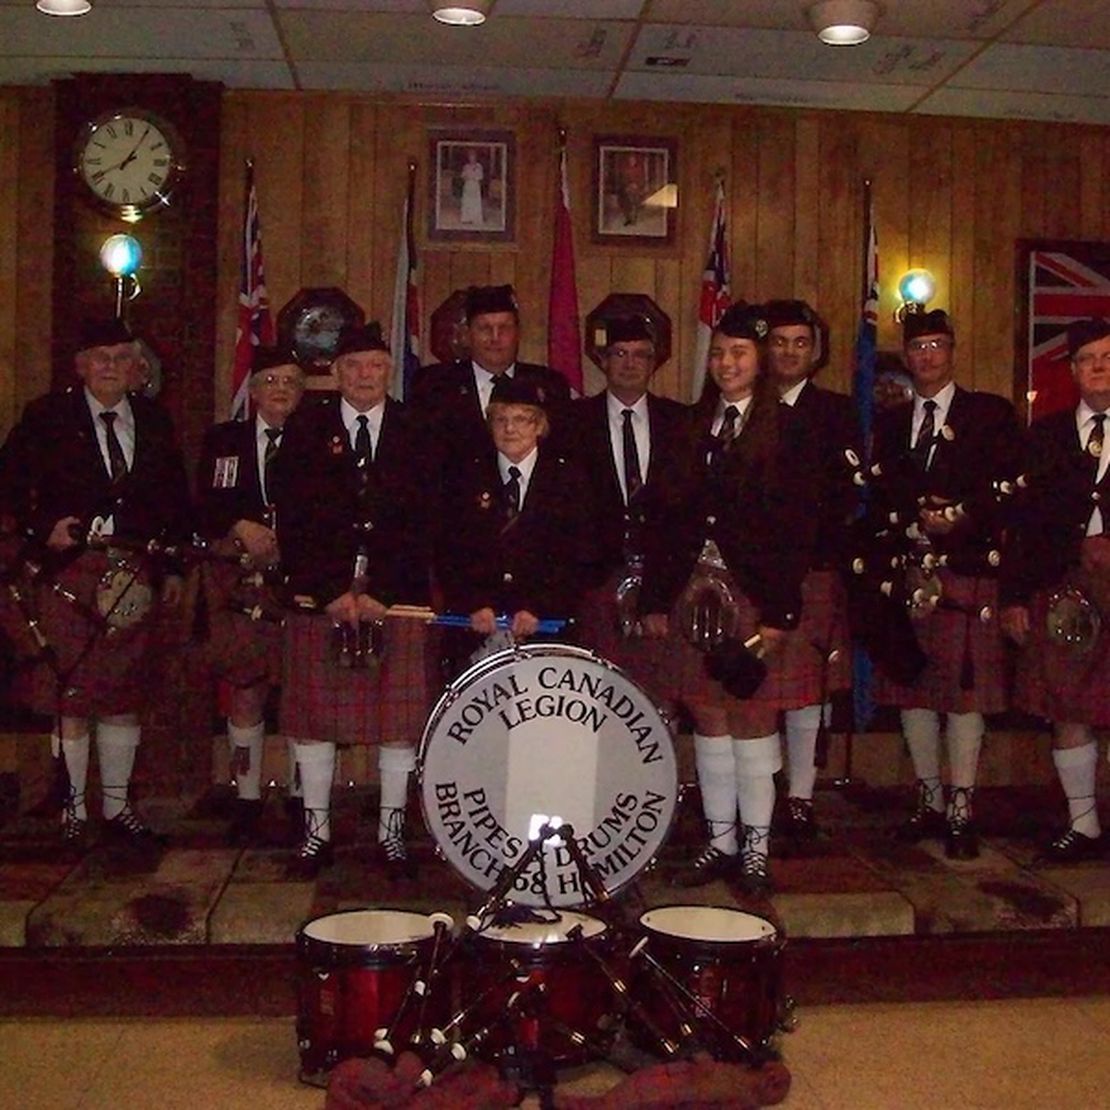 Branch 58 Royal Canadian Legion Pipes and Drums